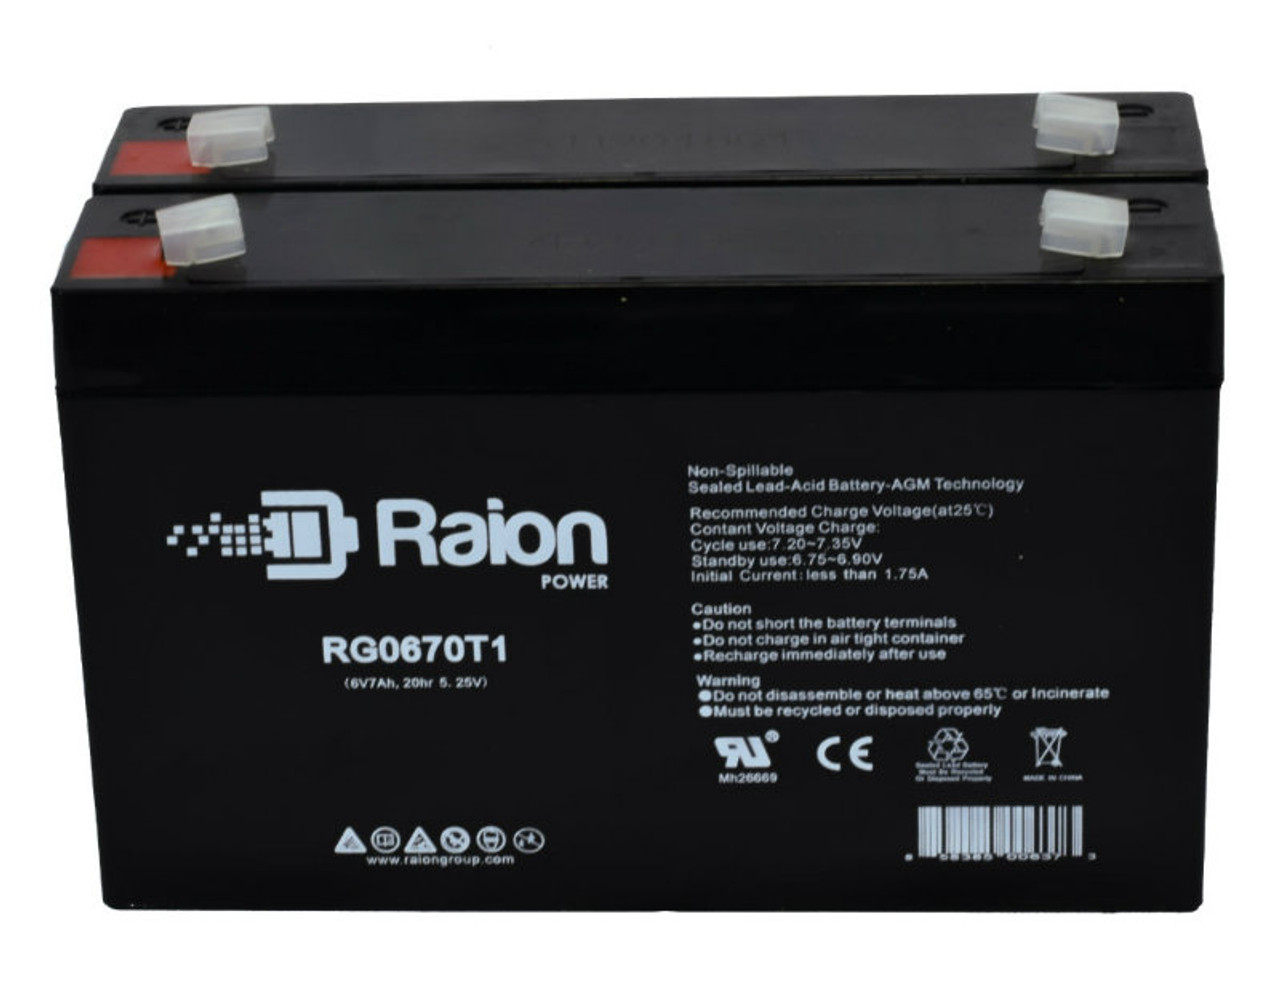 Raion Power RG0670T1 6V 7Ah Replacement Emergency Light Battery for Lithonia Lighting - 2 Pack